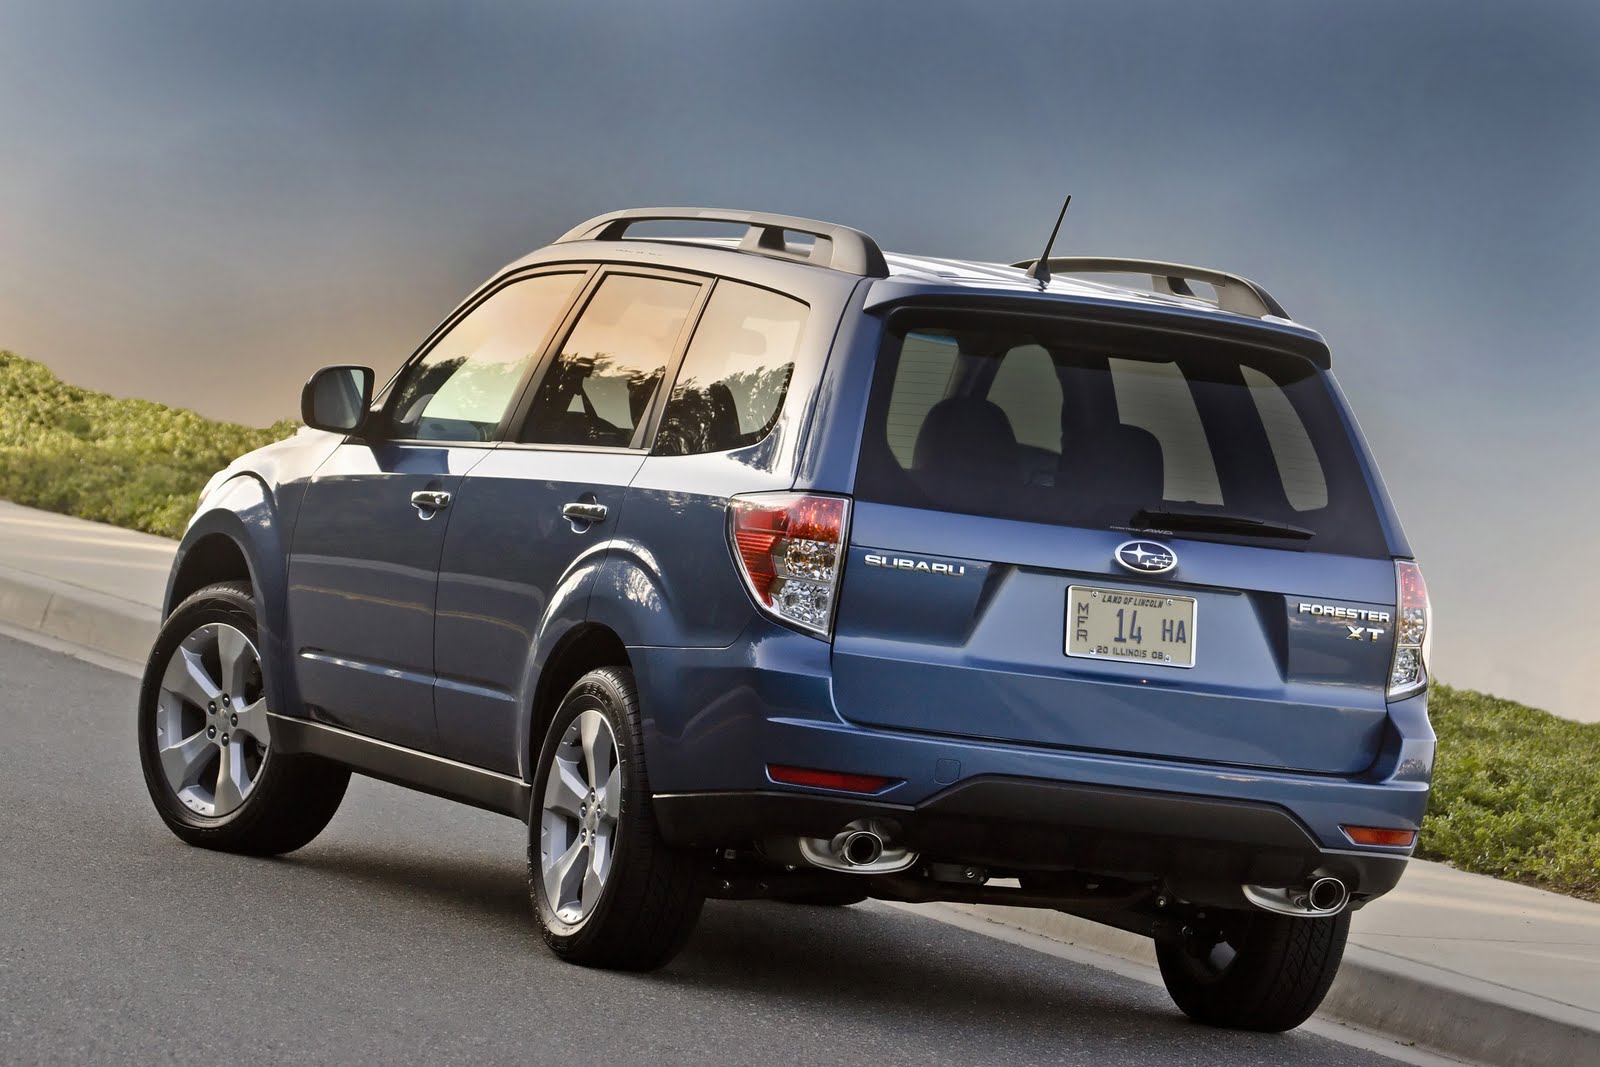 2011 Subaru Forester Review NEW CARUSED CAR REVIEWS PICTURE